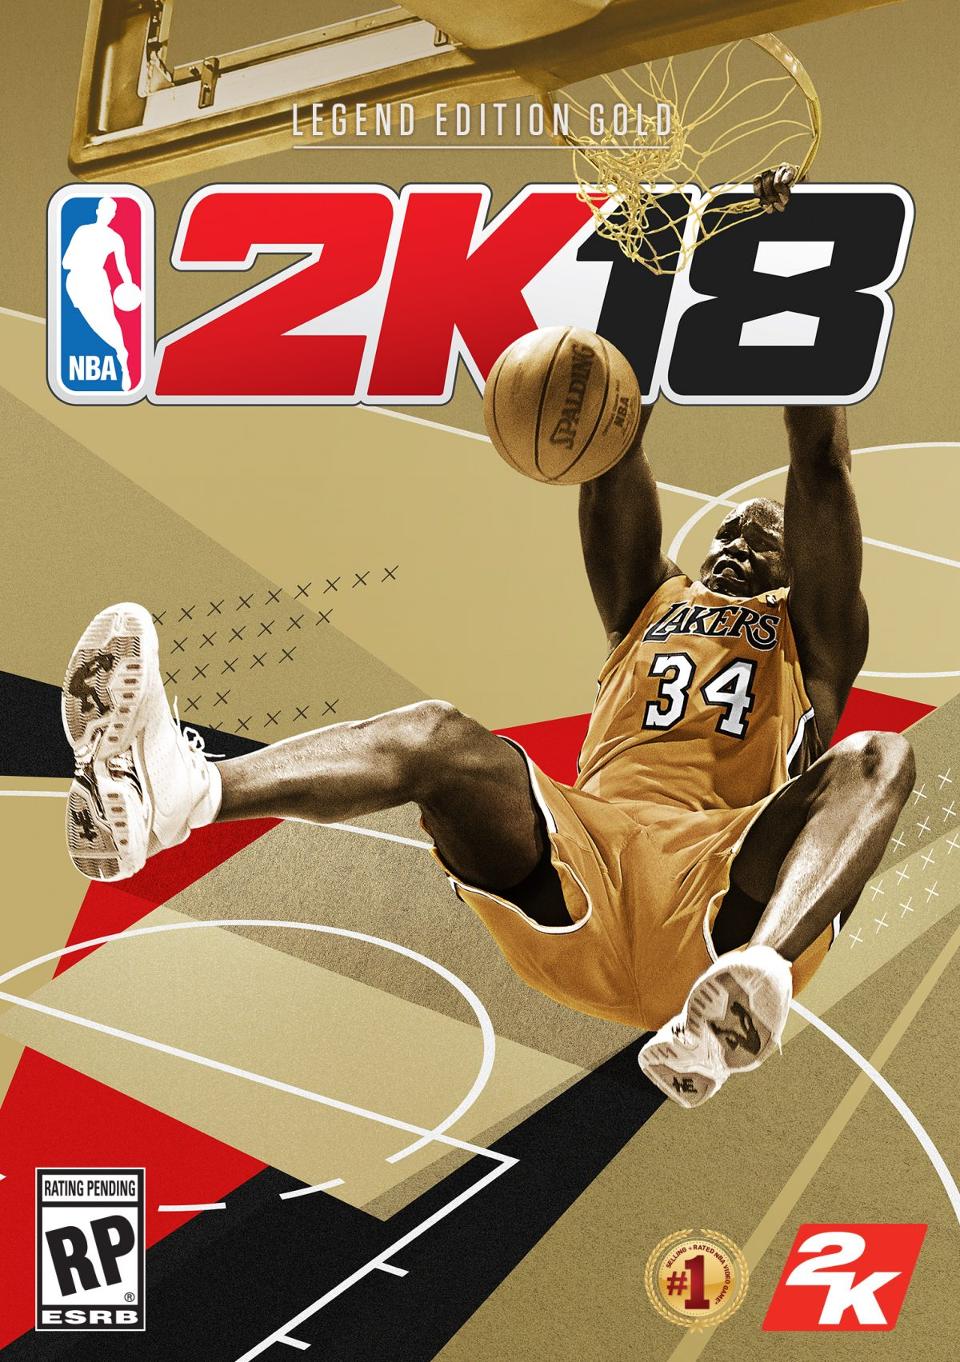 Throw NBA 2K18’s Cover In The Trash